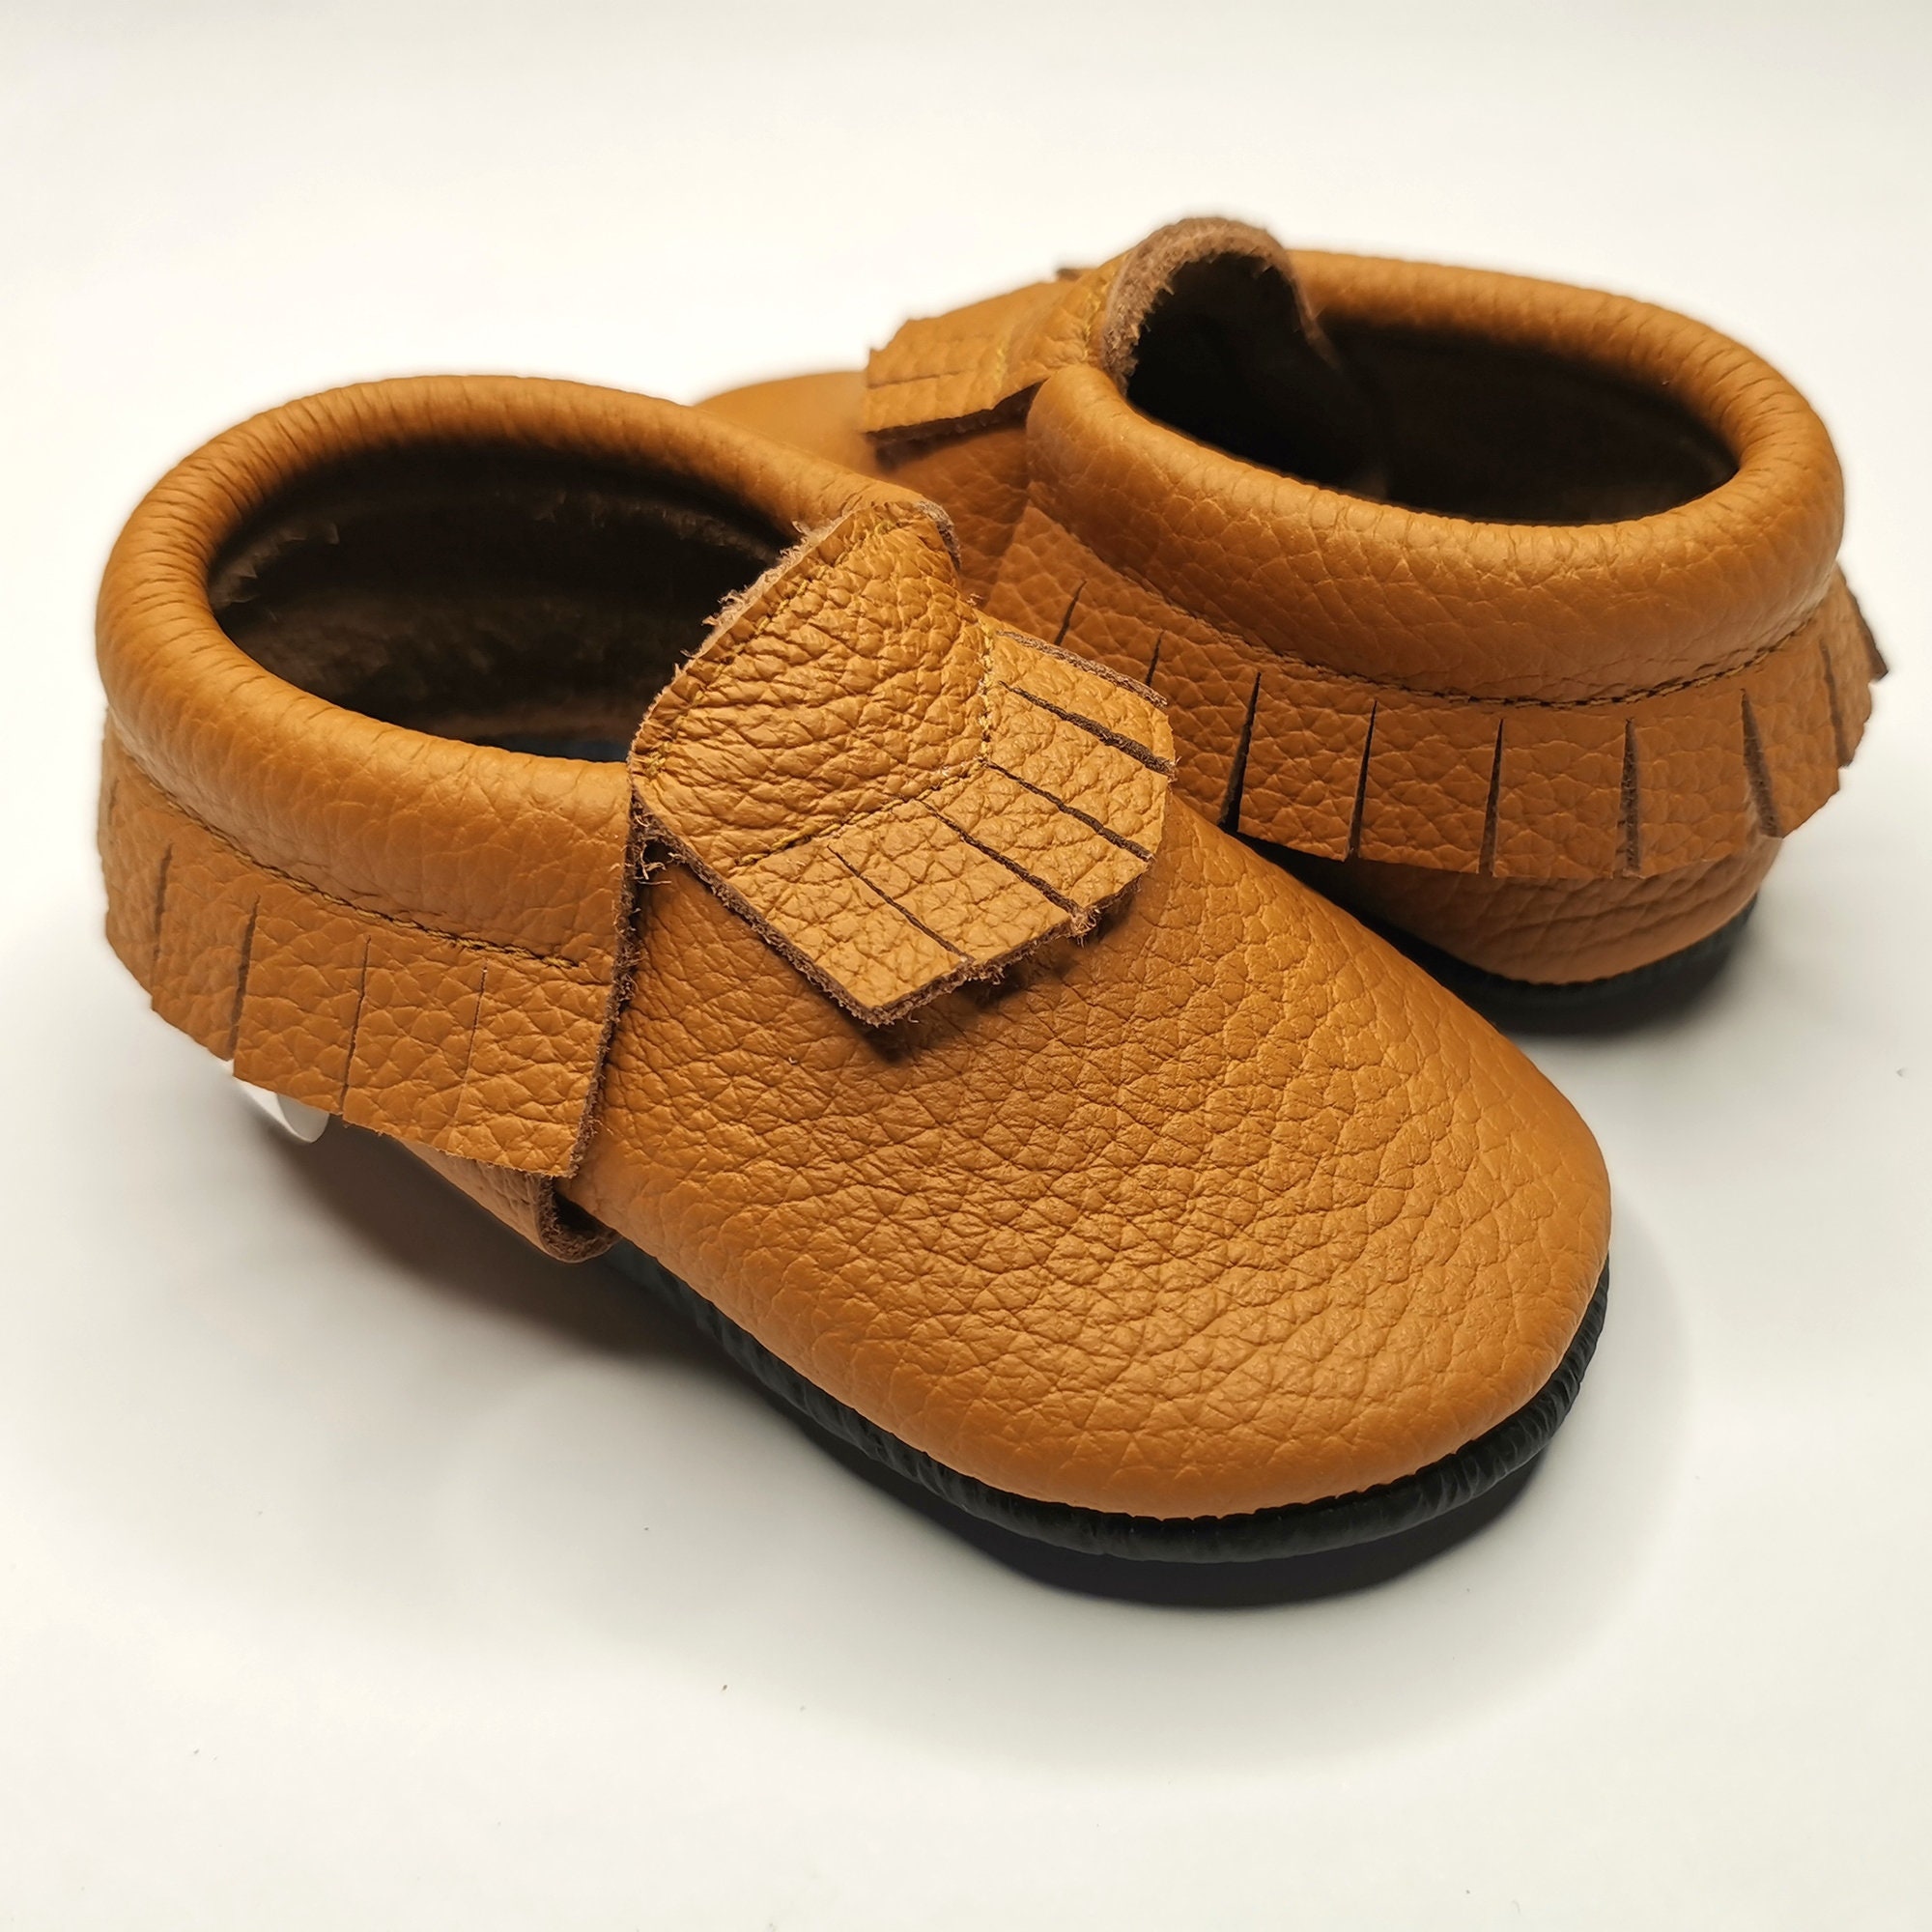 Fringe Baby Moccasins Handmade Genuine Leather Baby Boy Shoes Baby Girl Shoes Soft Sole Baby Shoes Italian Leather Infants & Toddlers Baby Shoes Newborns